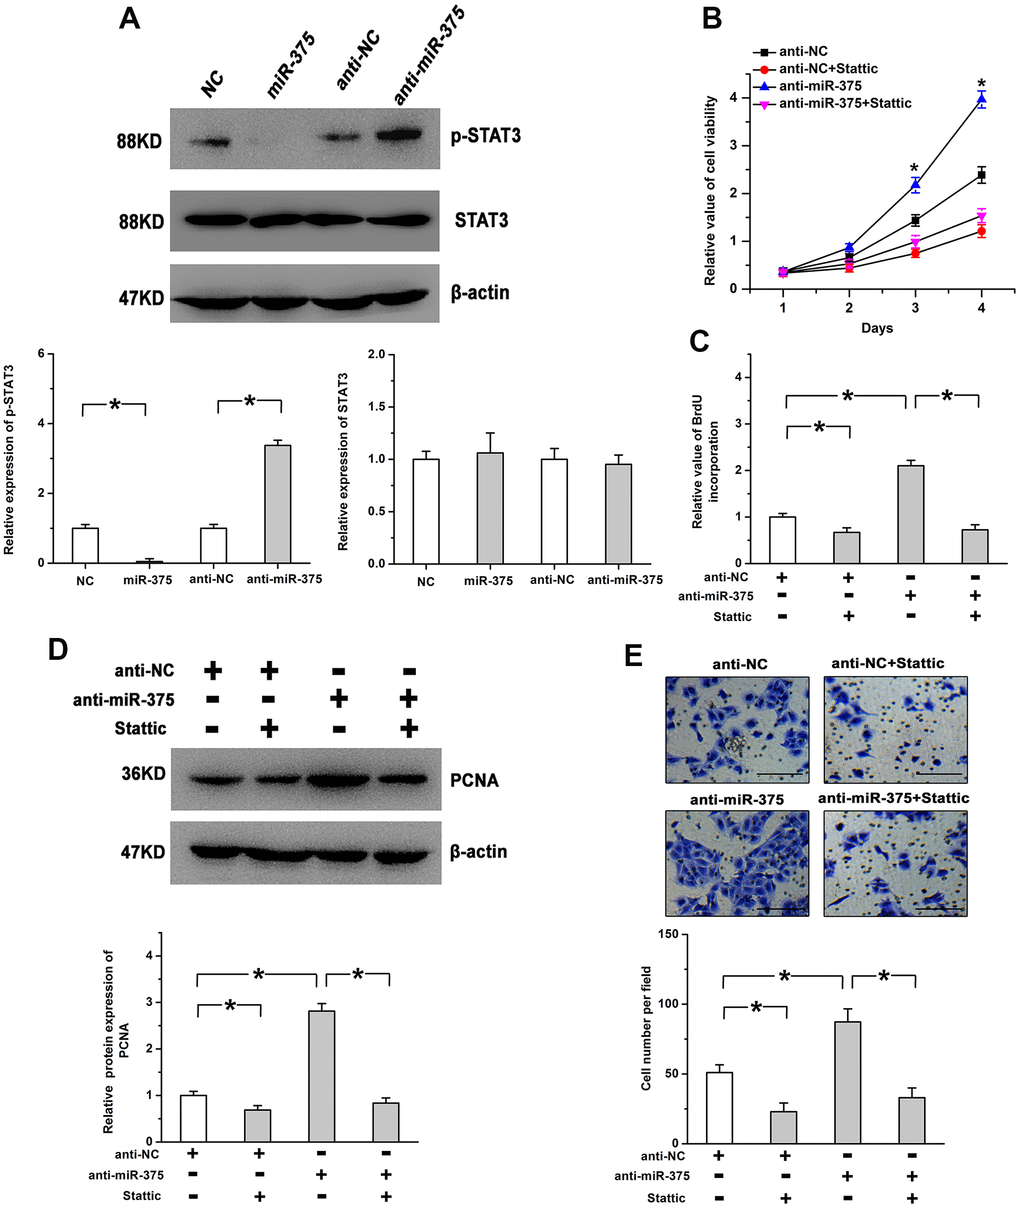 STAT3 is involved in miR-375-regulated cell proliferation in RMECs. (A) The phosphorylation of STAT3 was induced by anti-miR-375, whereas miR-375 repressed the phosphorylation of STAT3. There were no significant changes on the expression of total STAT3 after the treatment with miR-375 or anti-miR-375. The expression of p-STAT3 was quantified by the ratio of p-STAT3 to STAT3 and the expression of STAT3 was quantified by the ratio of STAT3 to β-actin. (B, C) The increase in cell viability (B) and BrdU incorporation (C) induced by anti-miR-375 was mitigated by the inhibition of STAT3. * P D, E) Anti-miR-375-increased PCNA expression (D) and cell migration (E) was attenuated by blocking the STAT3 pathway. Scale bar: 100 μm. All values are represented as the mean ± standard error of the mean. n = 3 per group. *P 